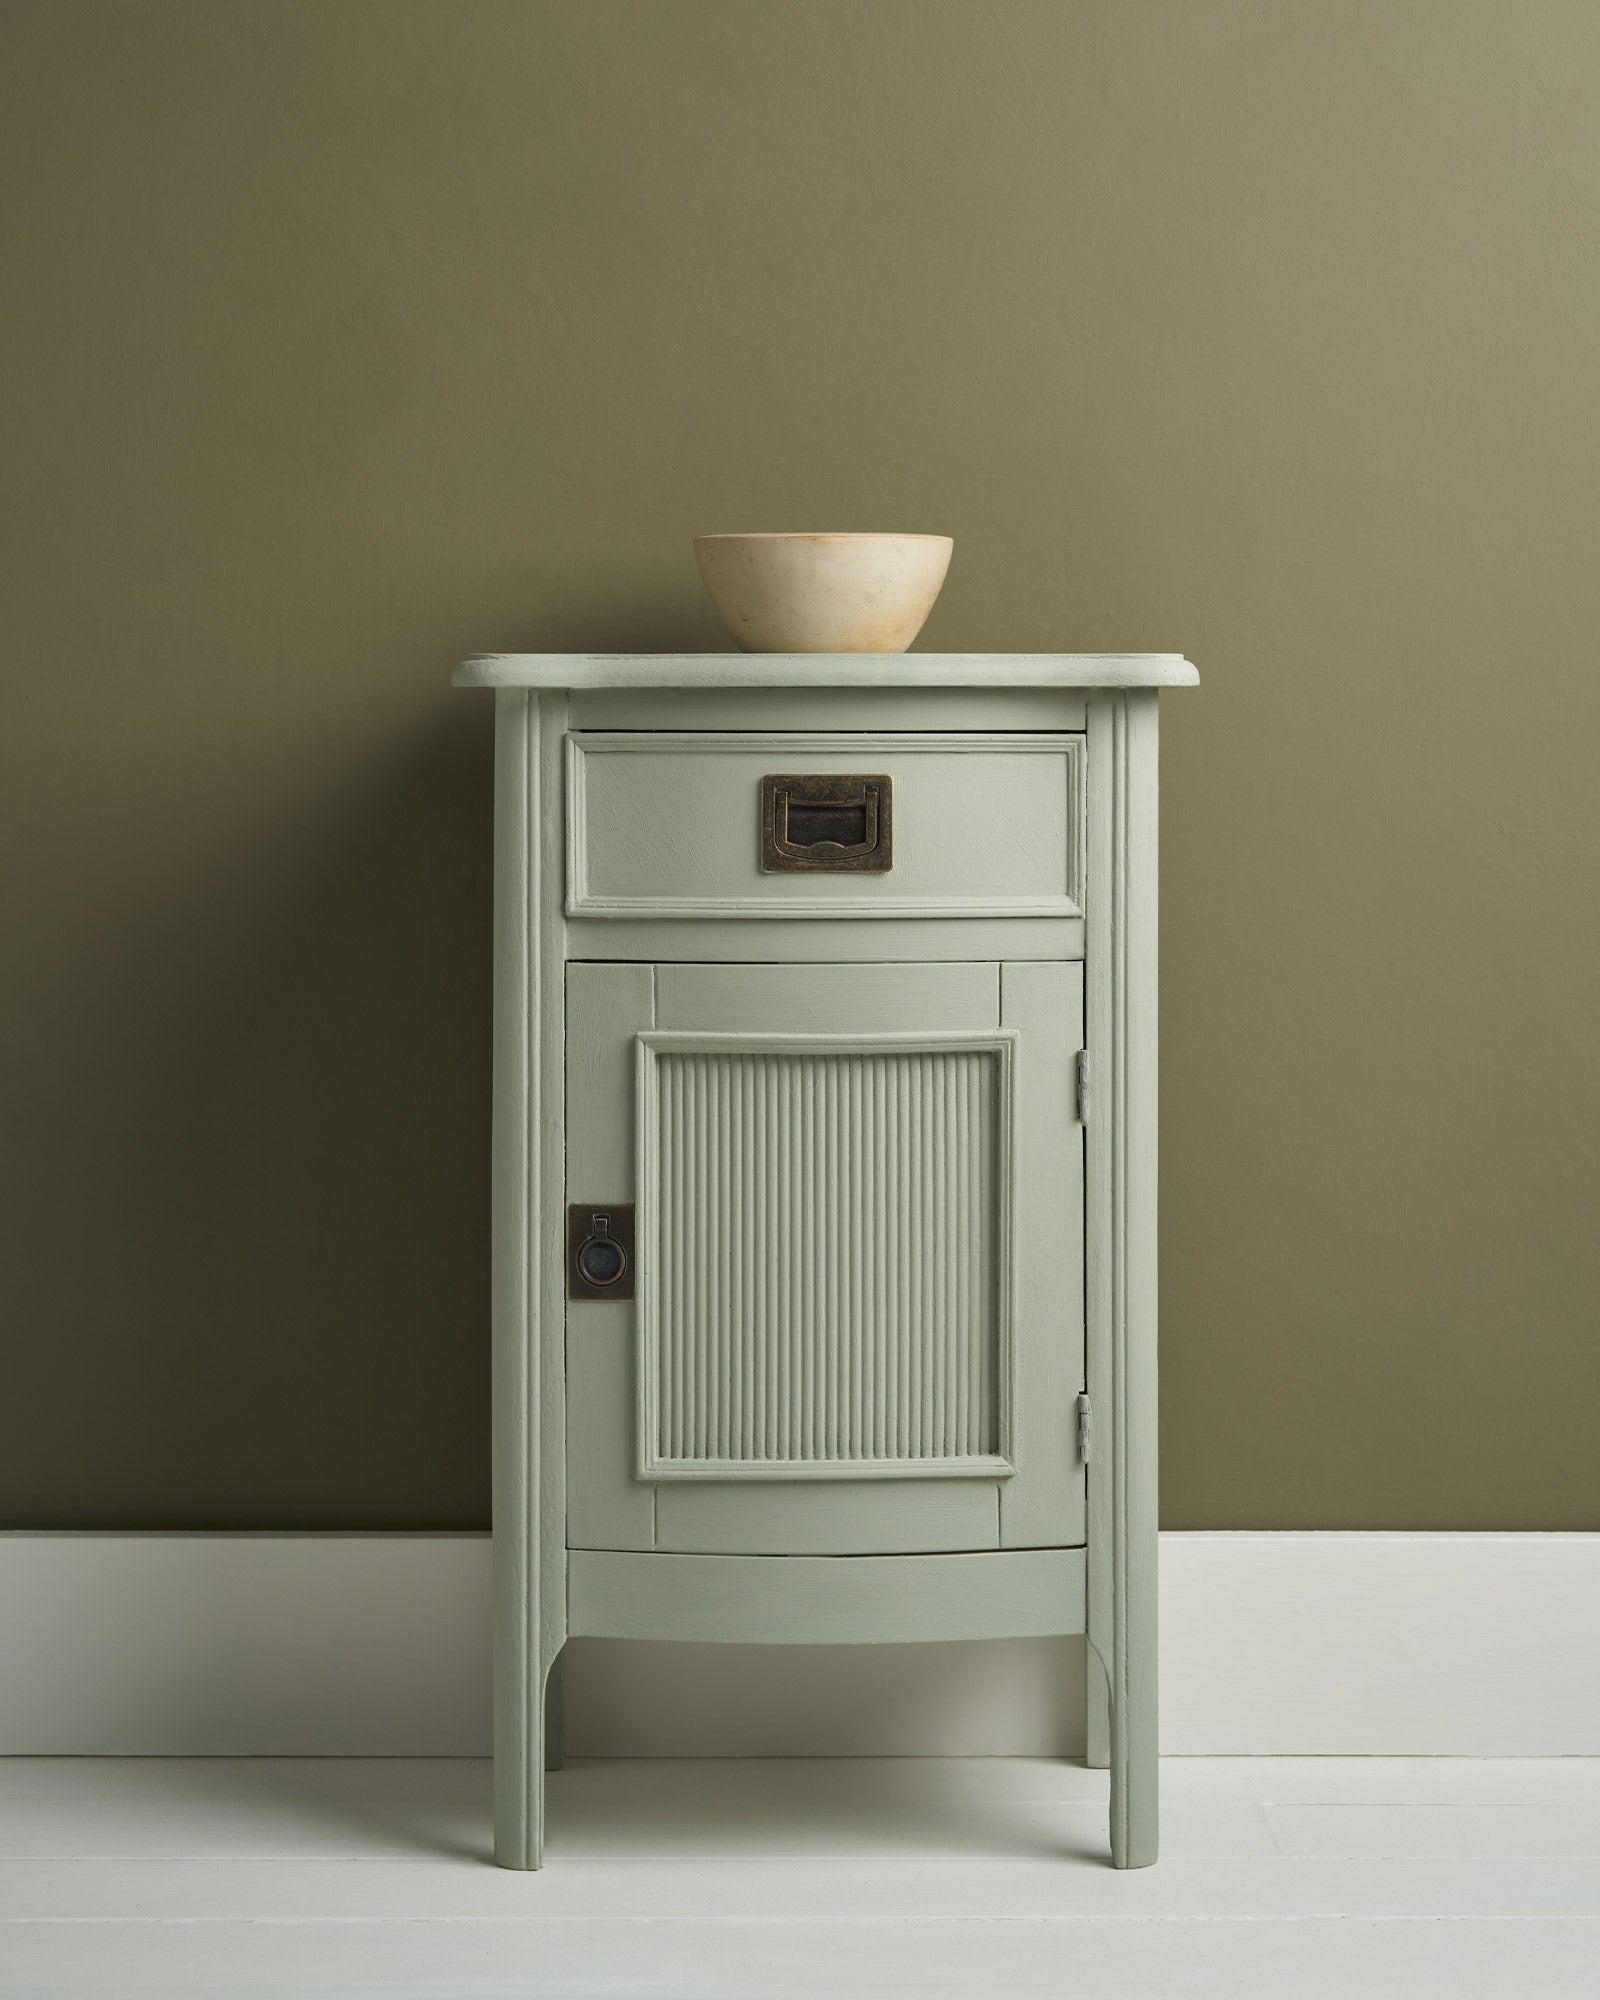 Annie Sloan Chalk Paint® - Coolabah Green - The 3 Painted Pugs